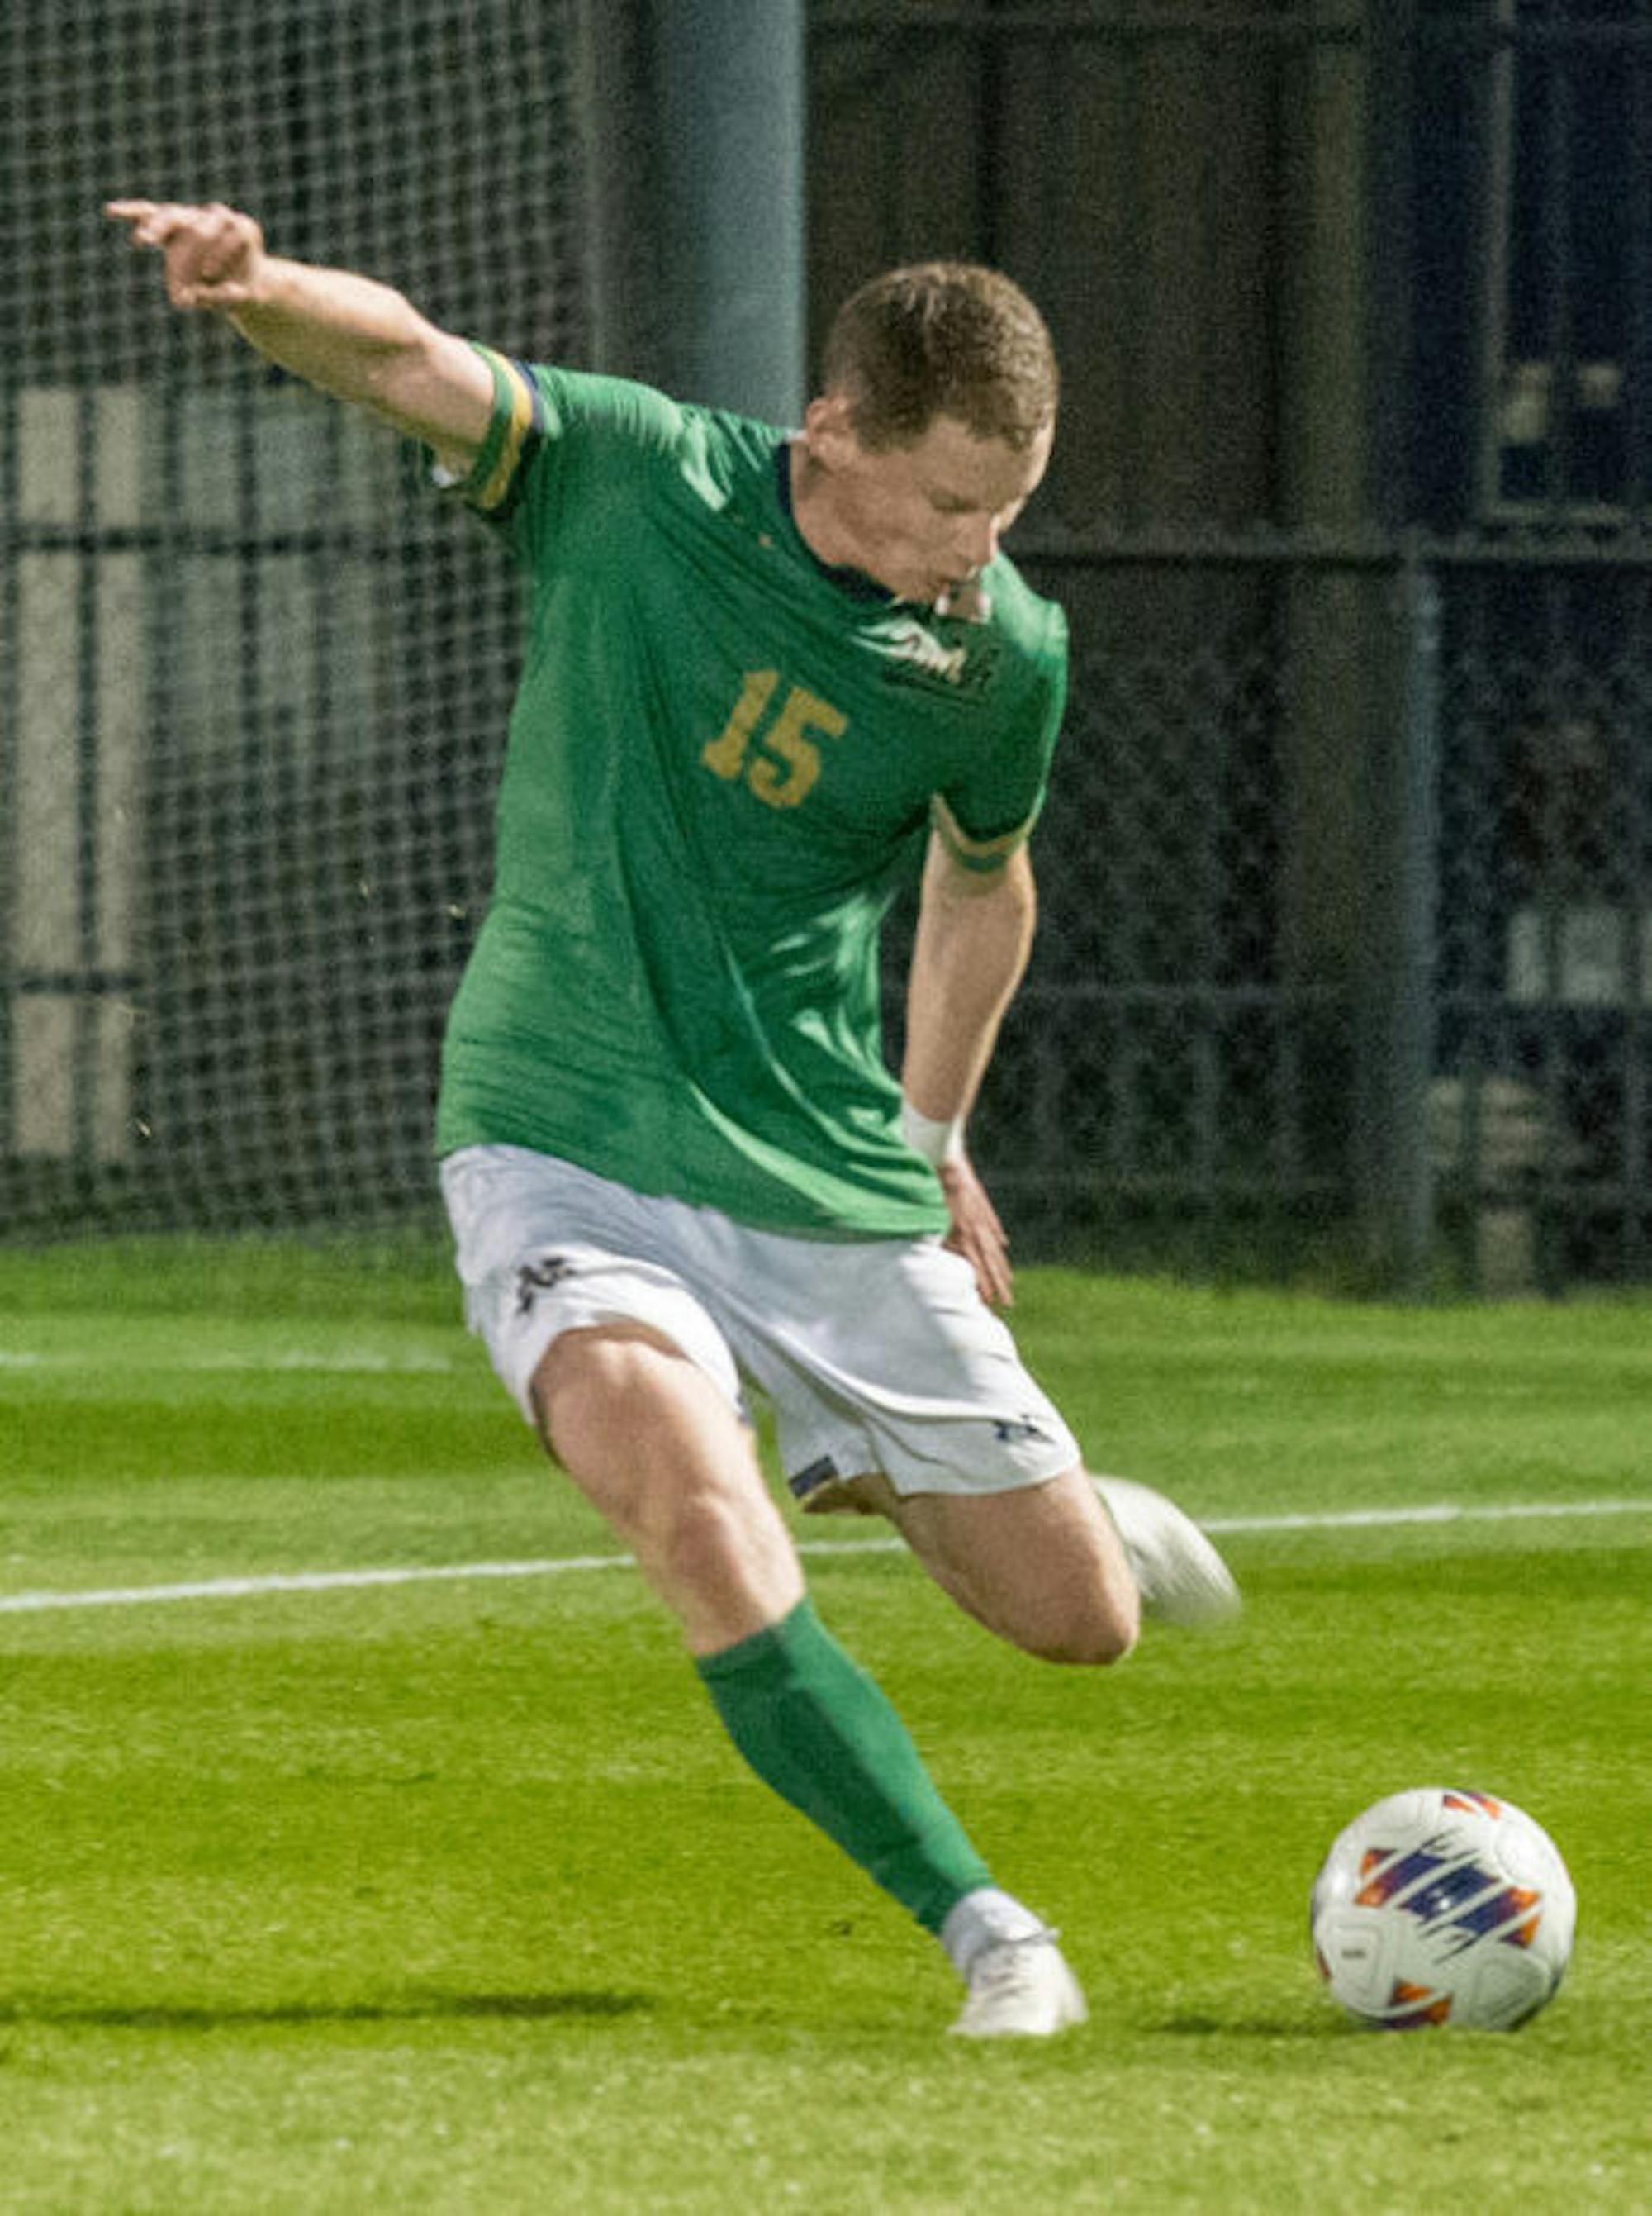 Junior Paddy Burns of Northern Ireland prepares to kick the ball in a men’s soccer match against North Carolina on Sept. 24, 2022.